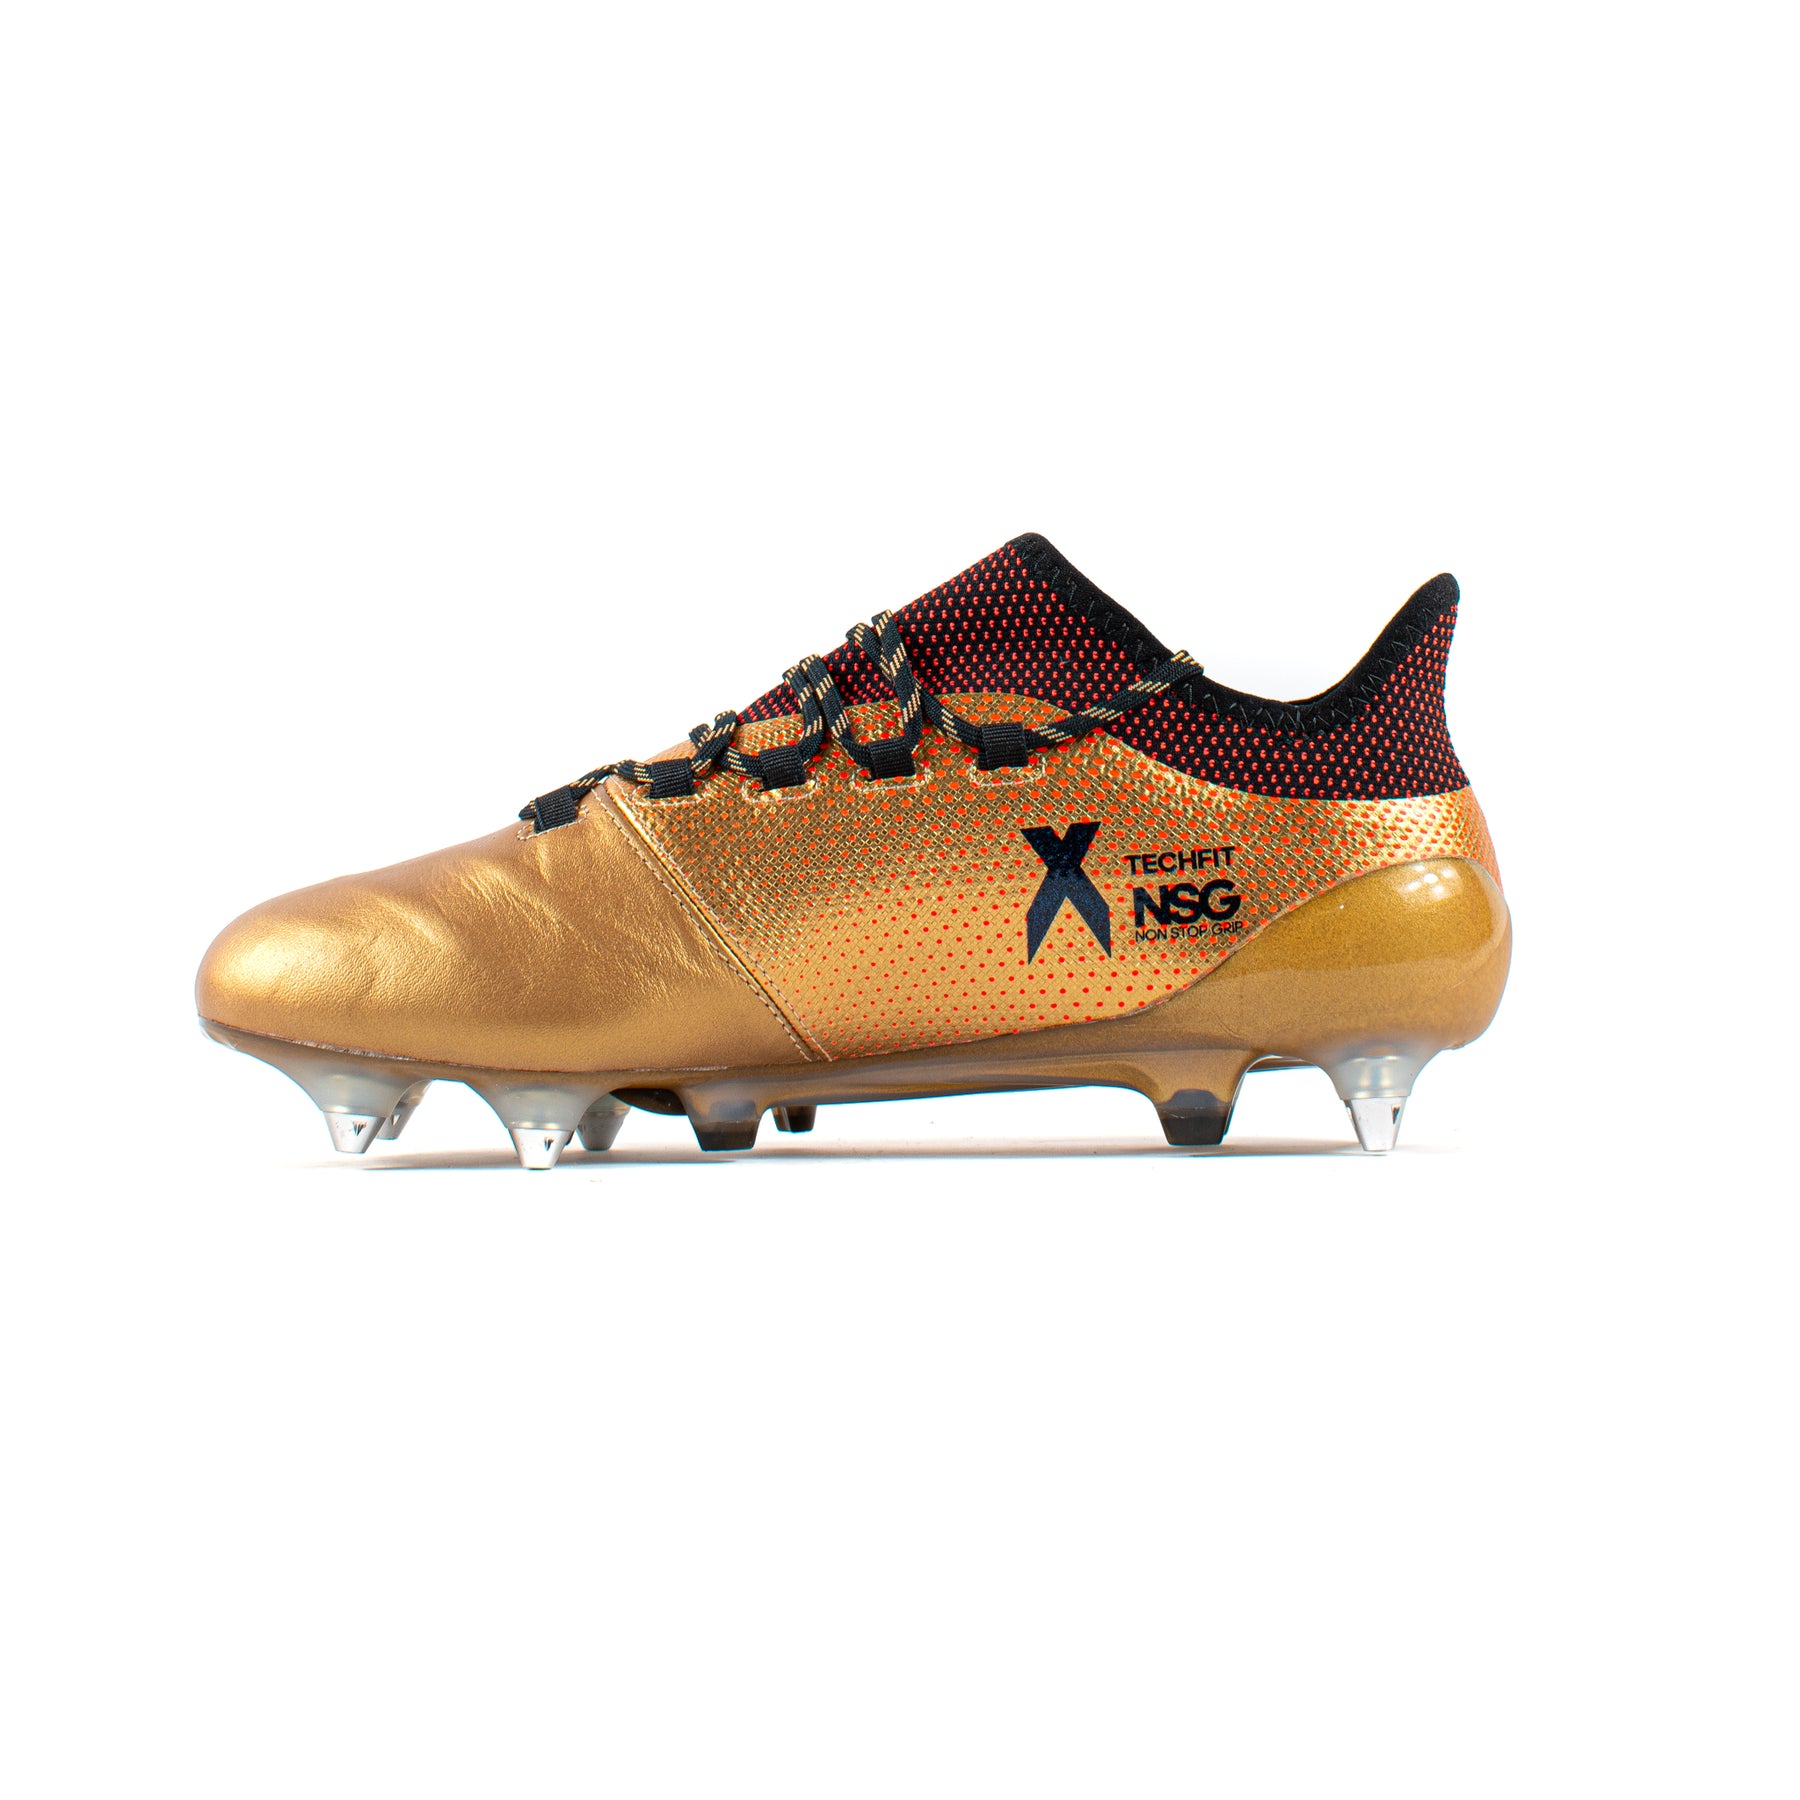 Adidas X17.1 Leather Gold SG – Soccer Cleats